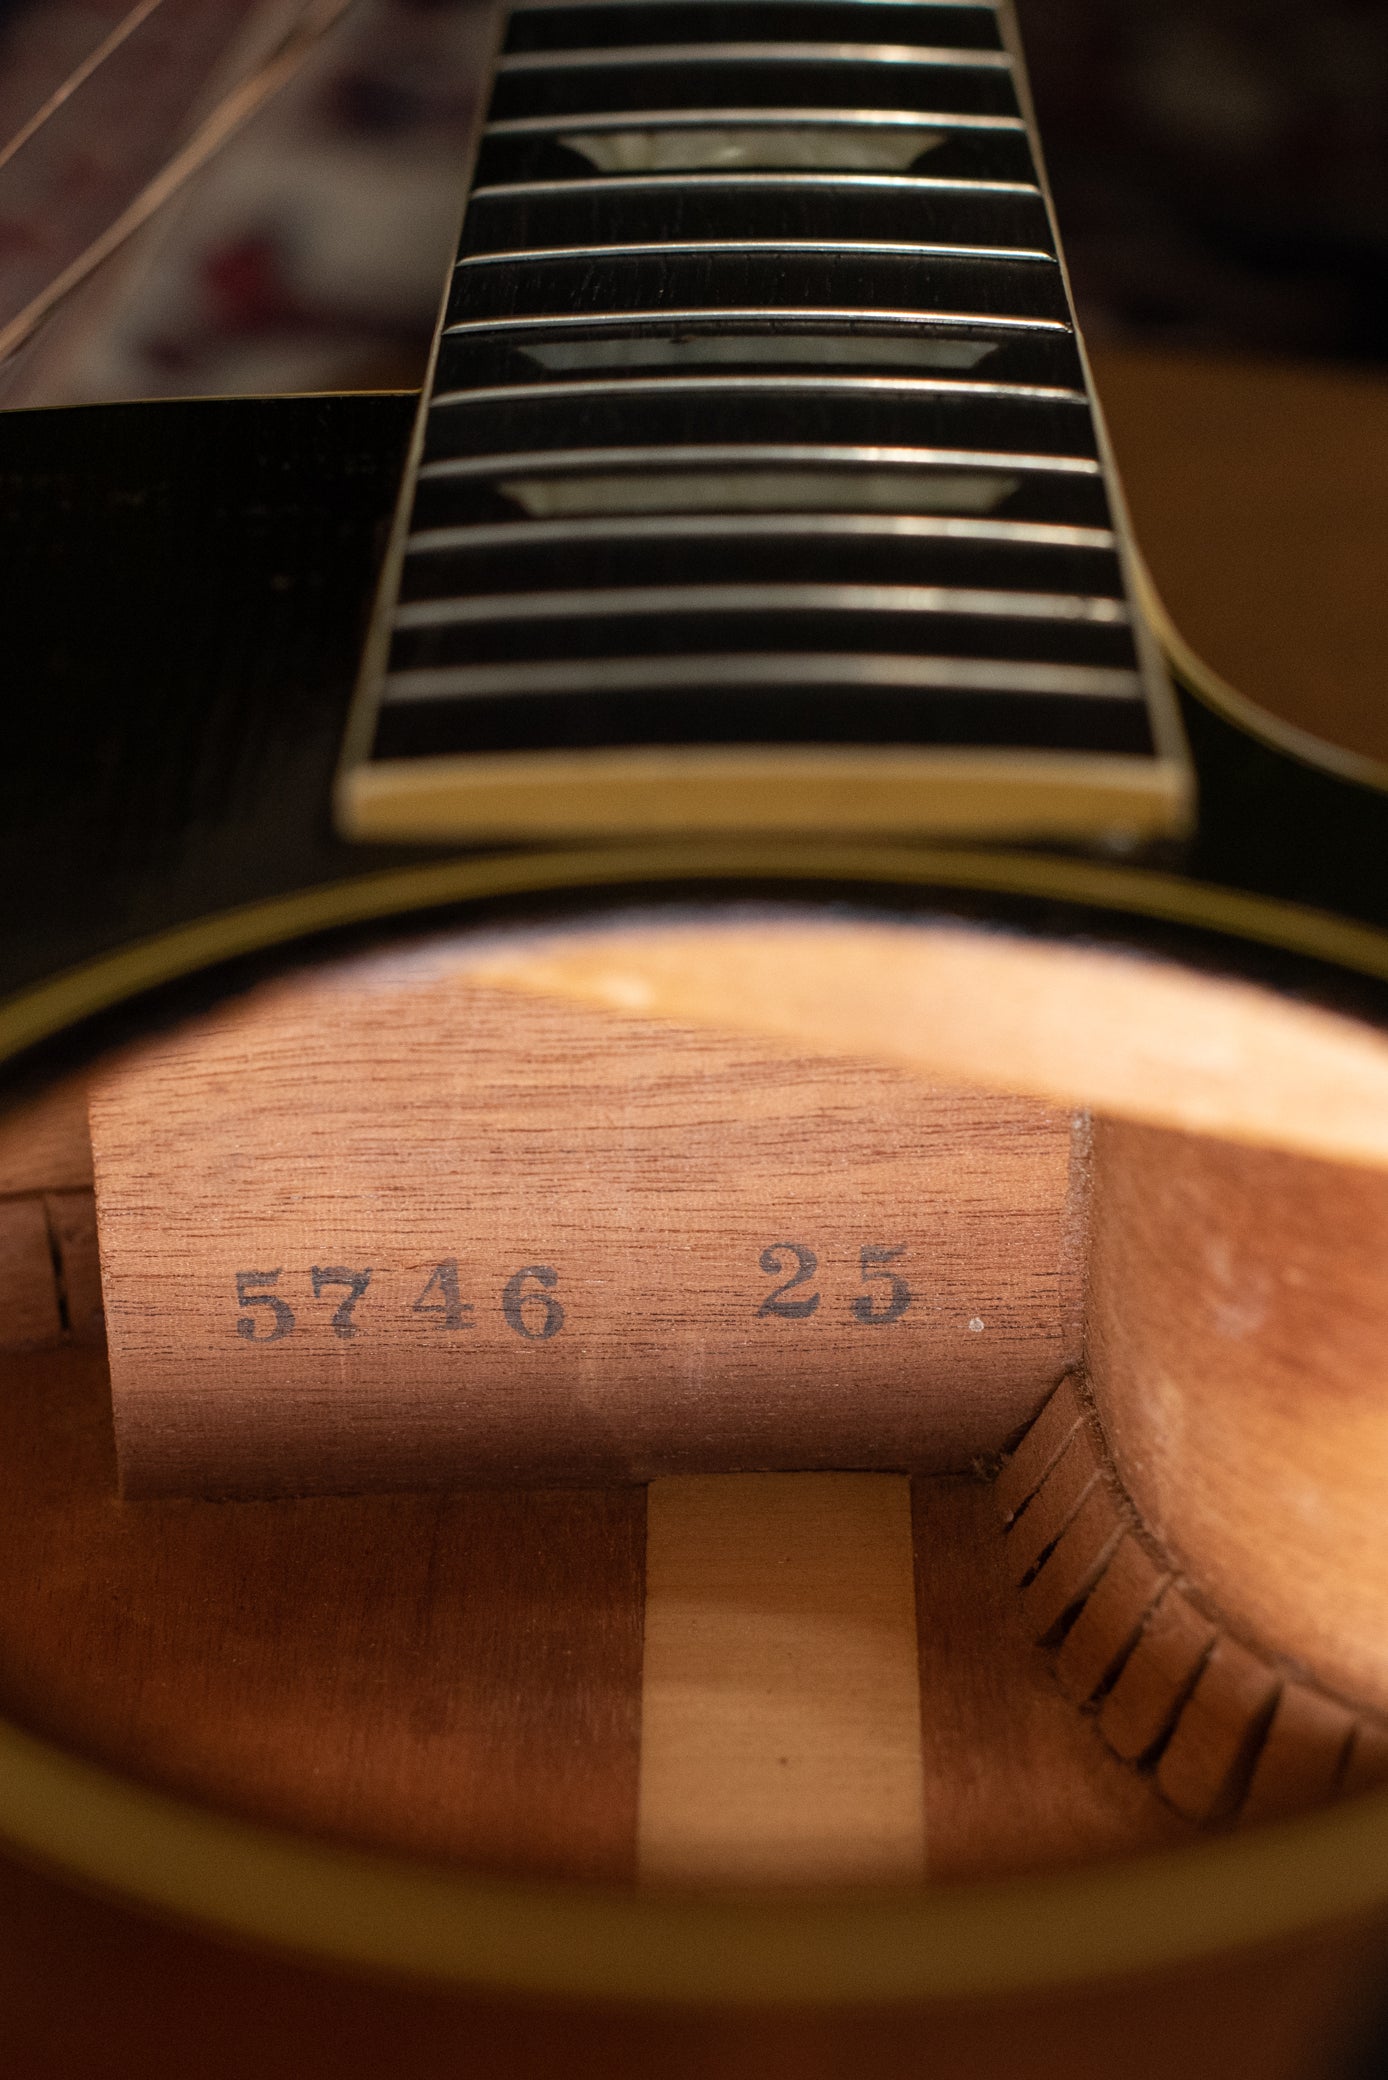 Gibson FON factory order number